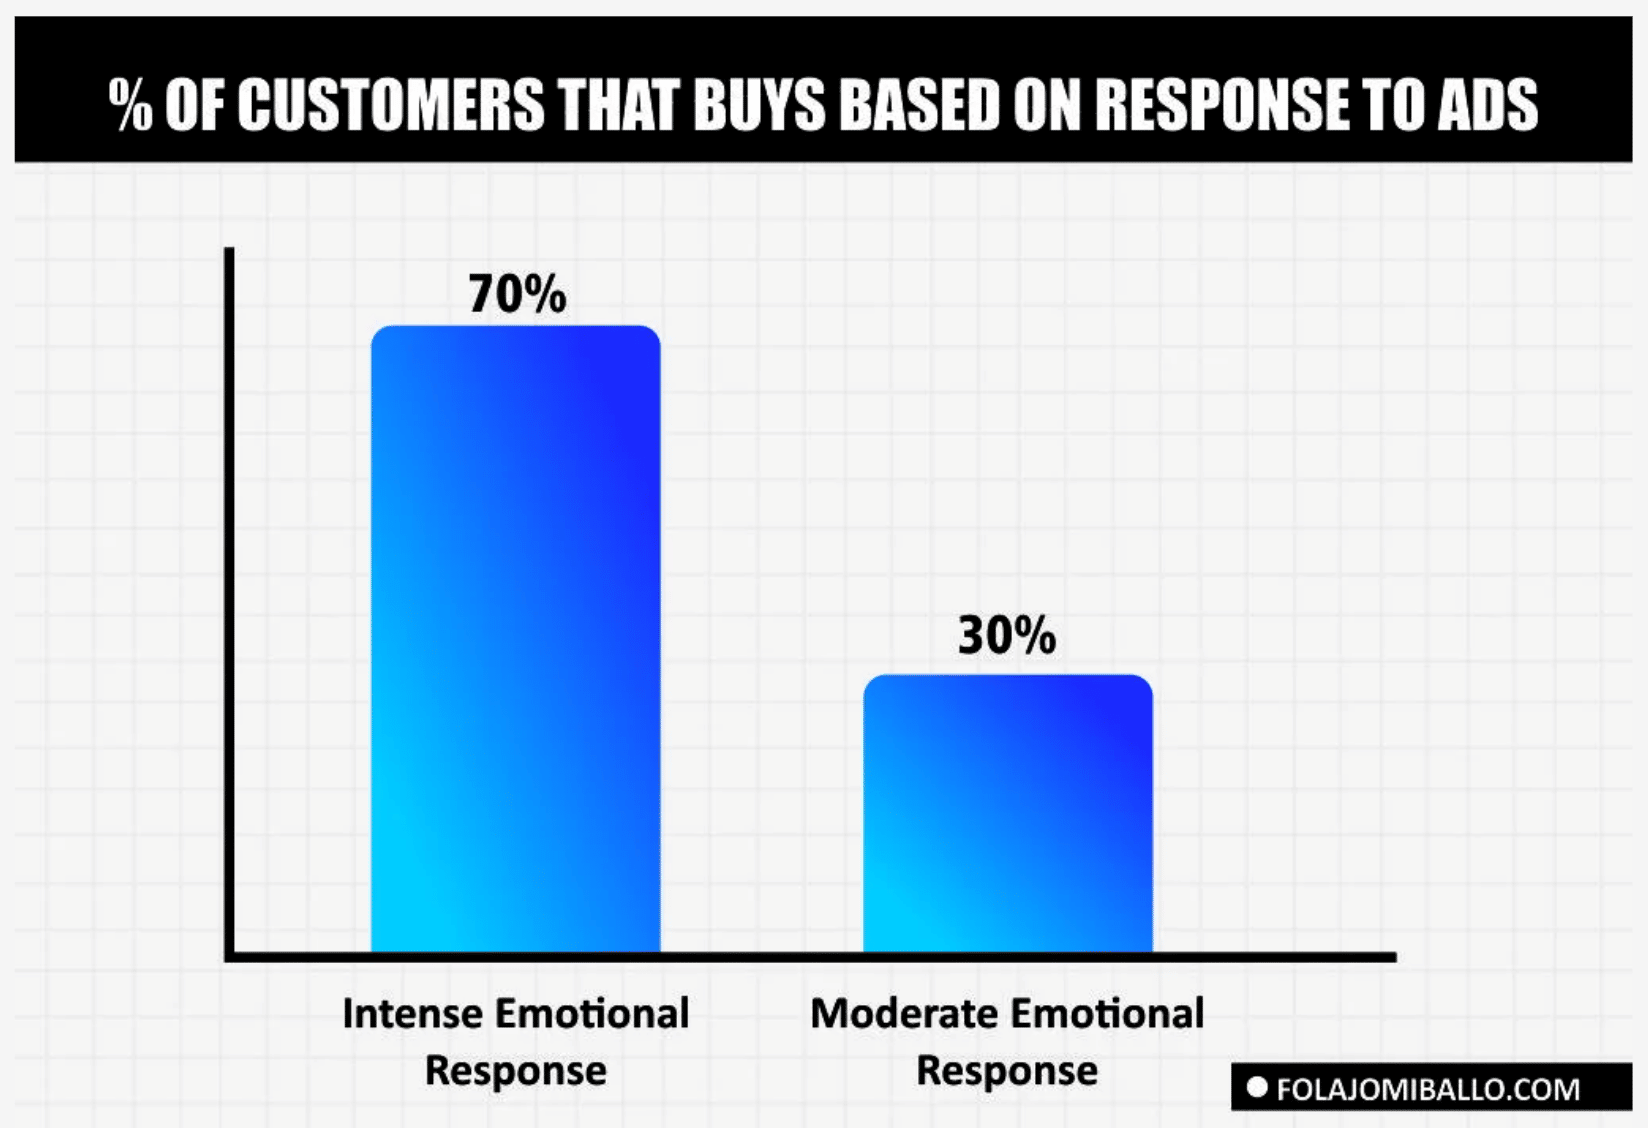 bar graph shows that 70% of customers who experience an emotional response to marketing are very likely to make a purchase